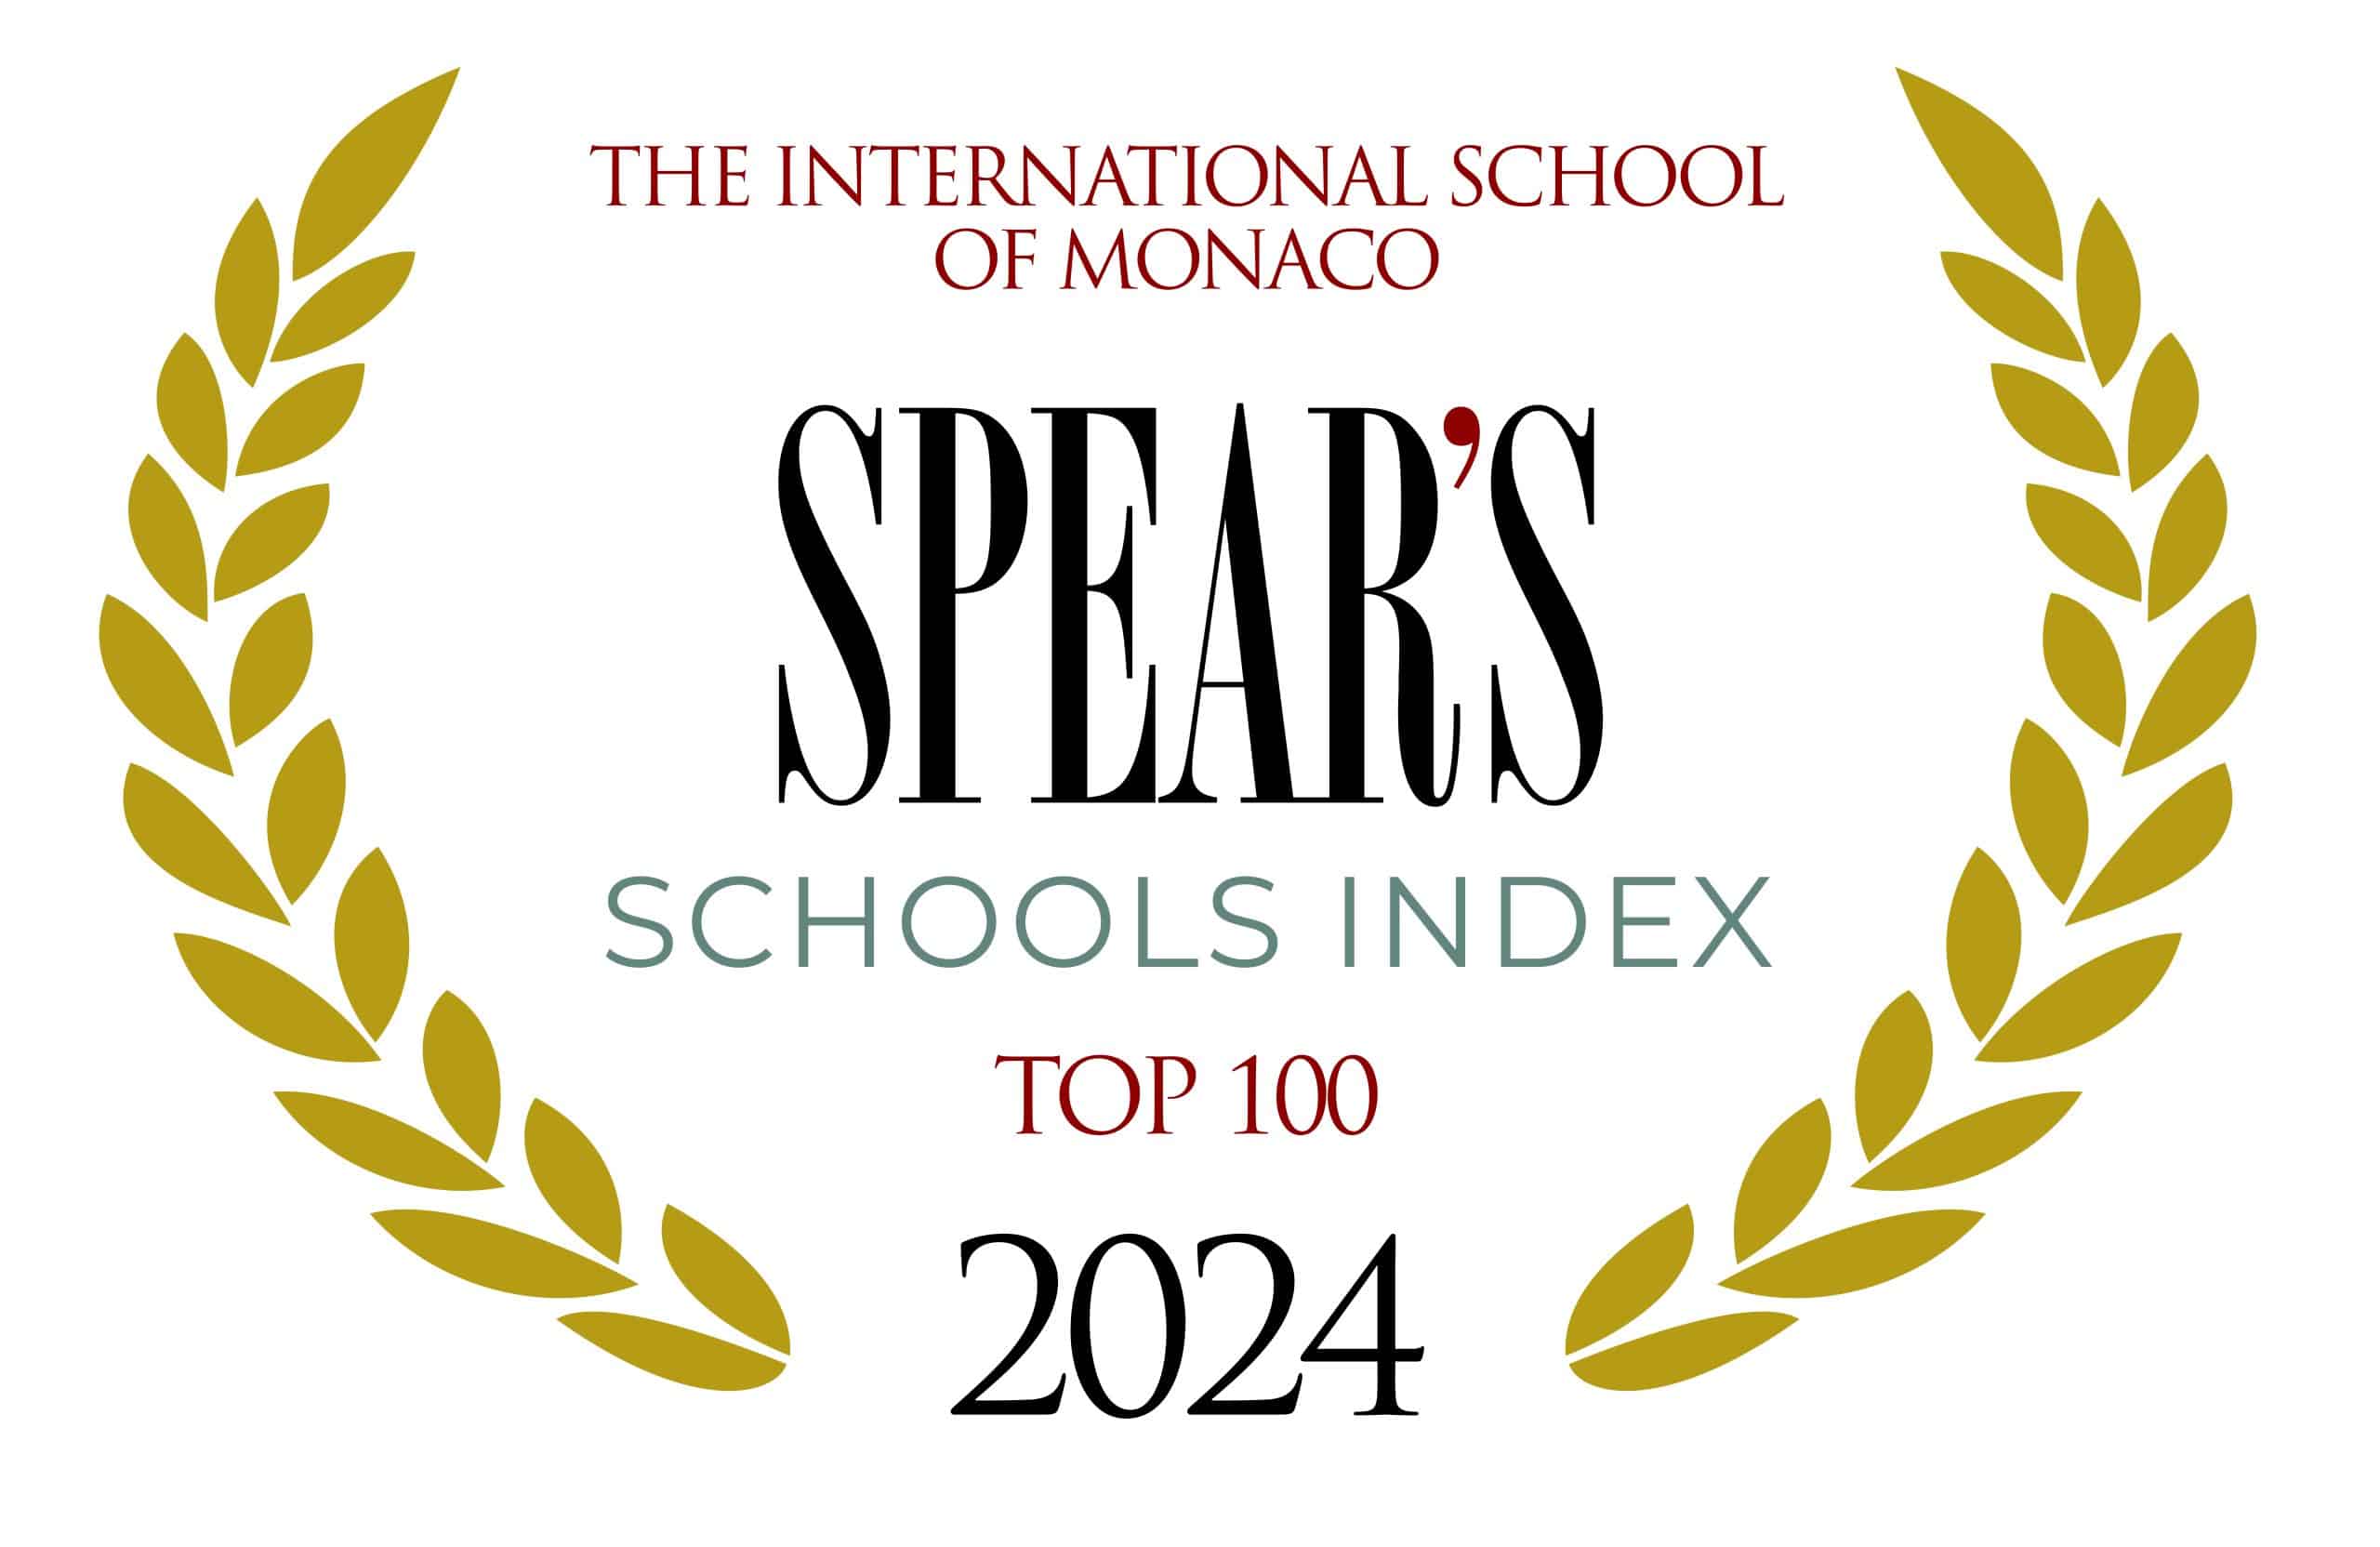 ISM named as top school in Spear’s Schools Index 2024 Image